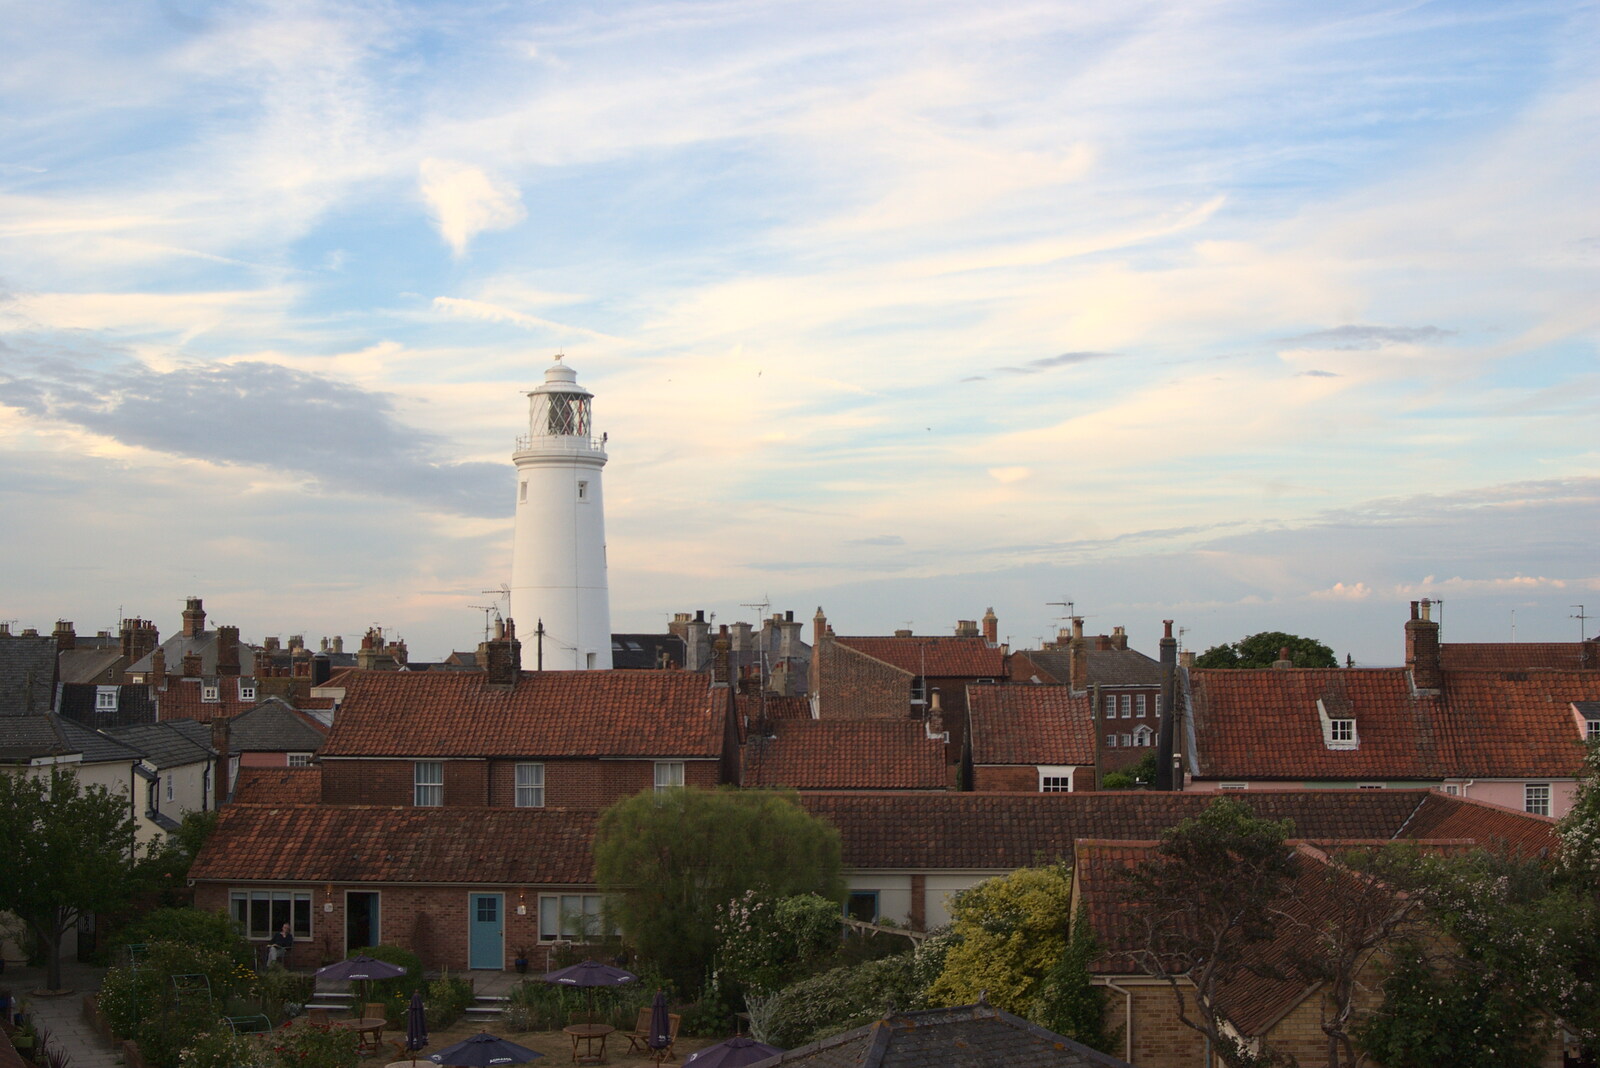 The view from the hotel window from A "Minimoon" and an Adnams Brewery Trip, Southwold, Suffolk - 7th July 2010